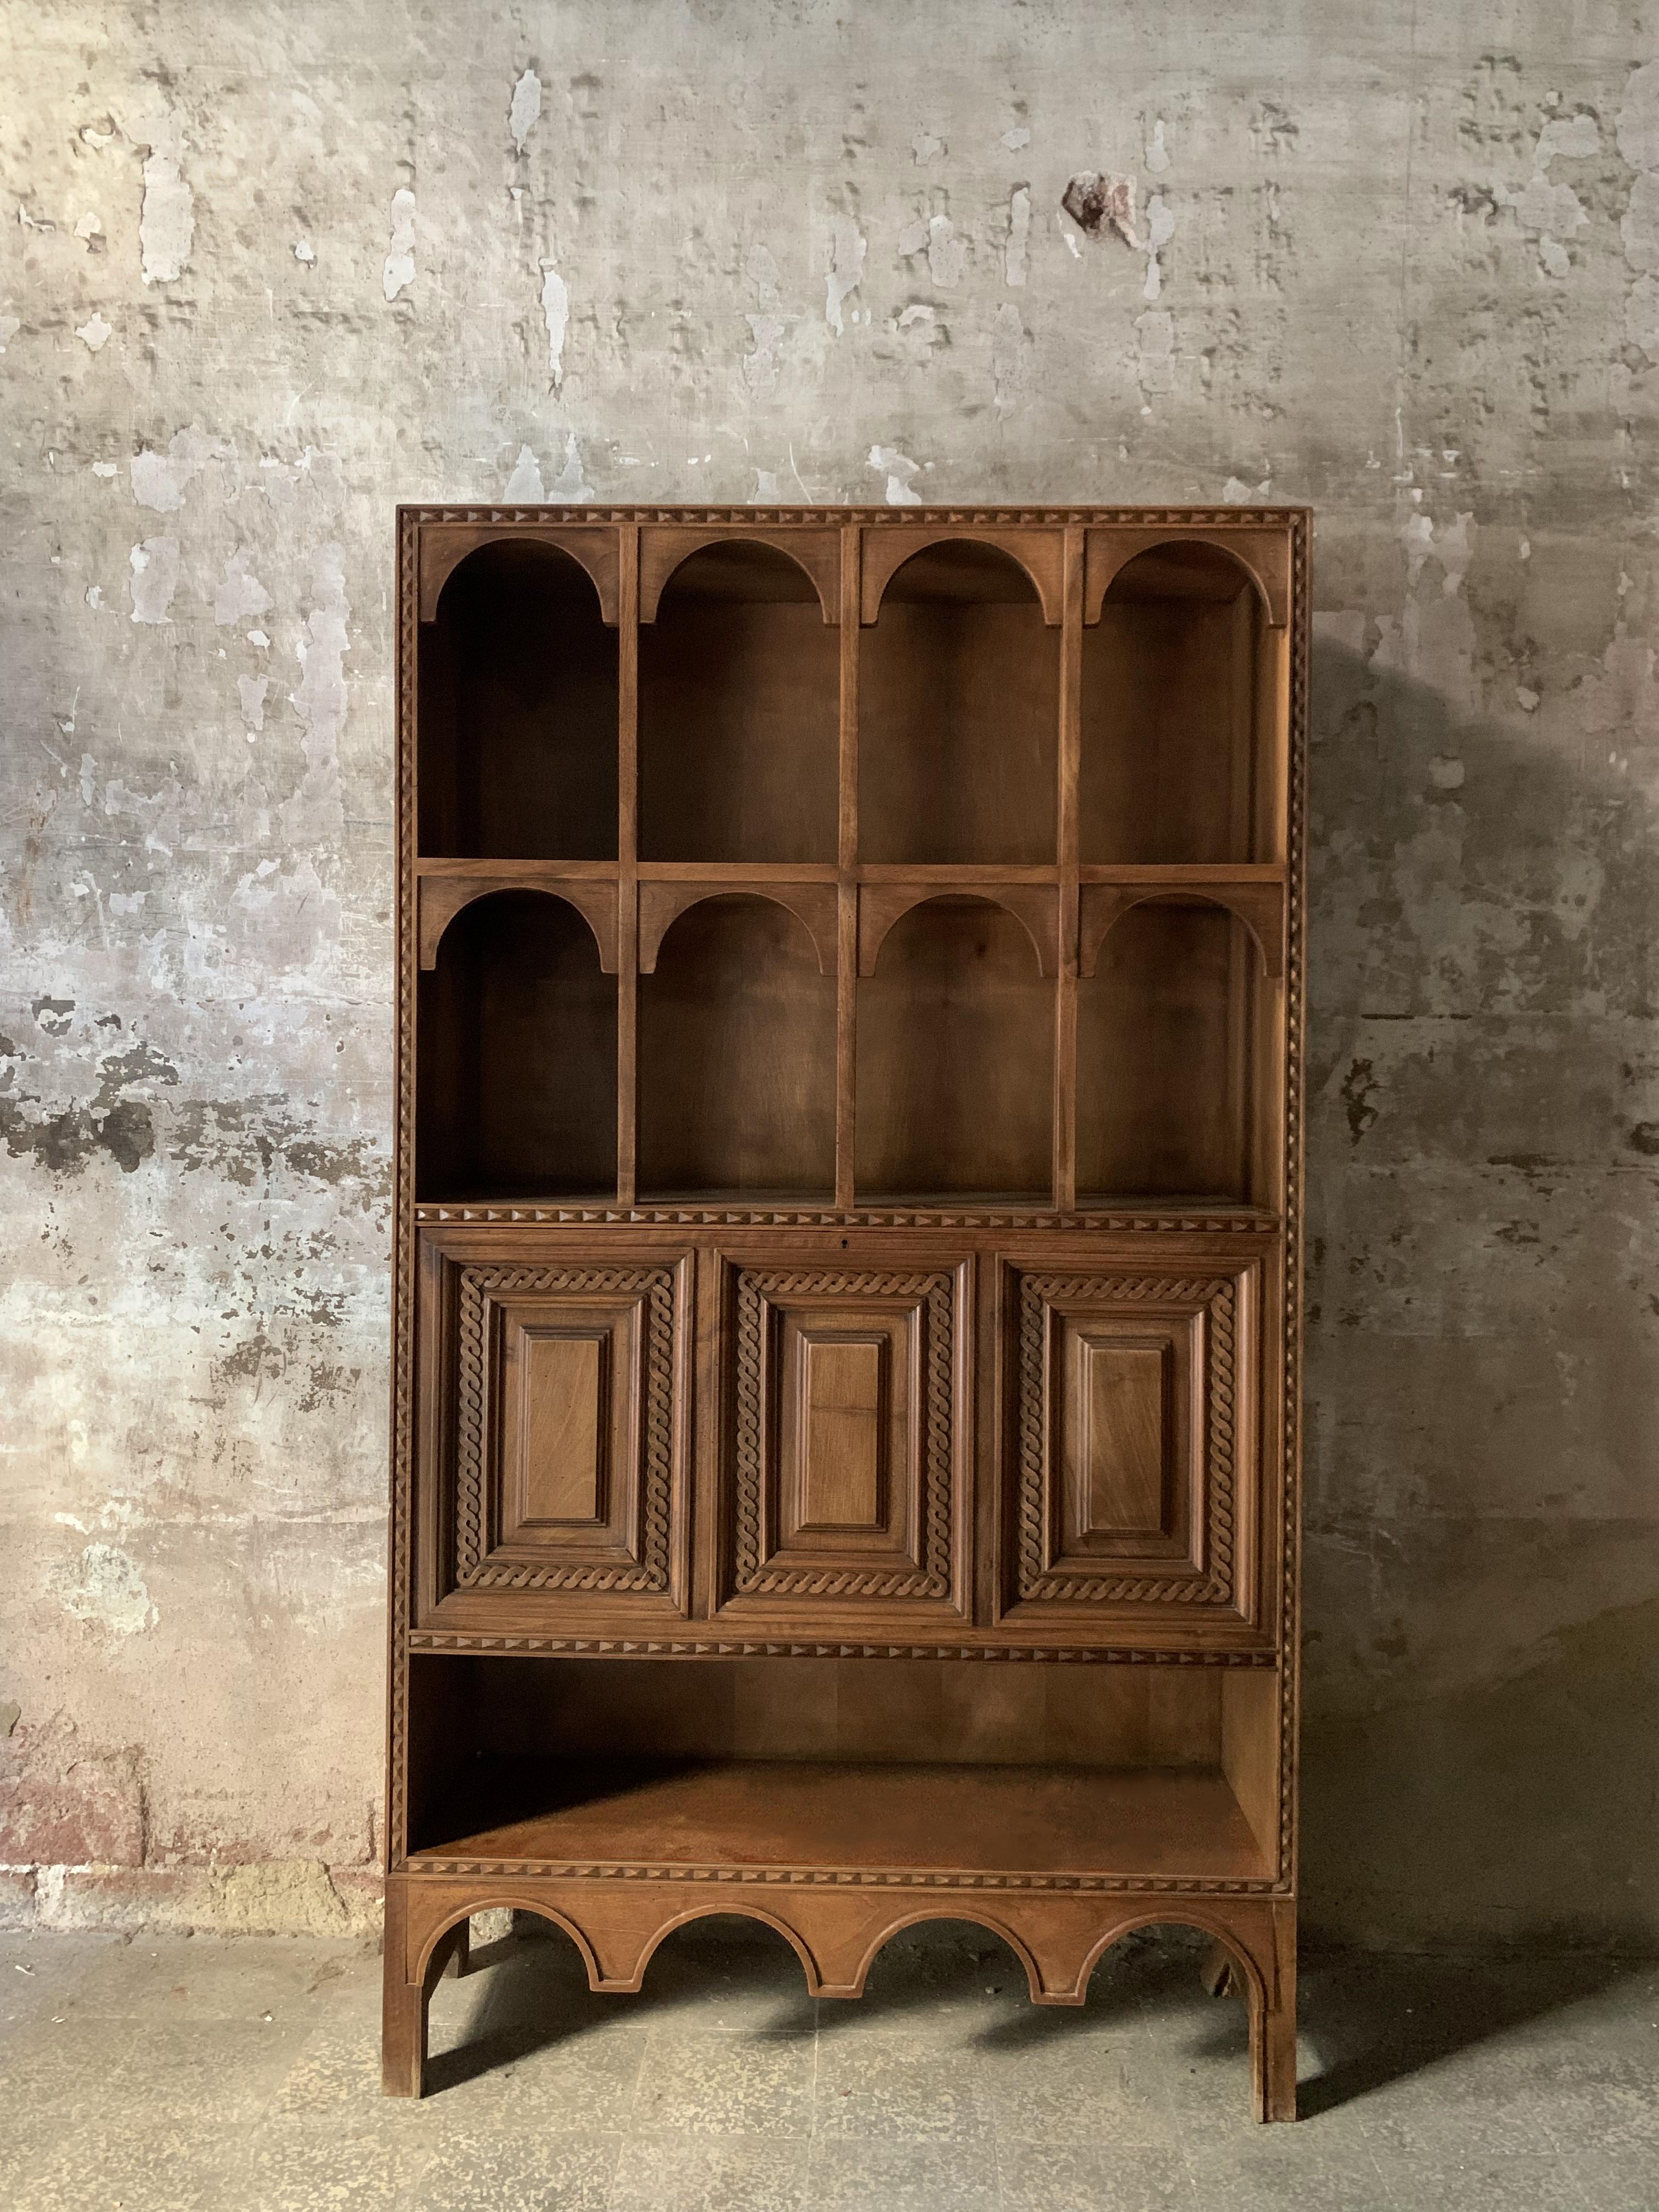 Imagine a magnificent wooden library cabinet that transports us to the 1950s and reflects the charm and distinction of Spanish style of that era. Every detail of this unique piece speaks of meticulous craftsmanship and timeless elegance.
This